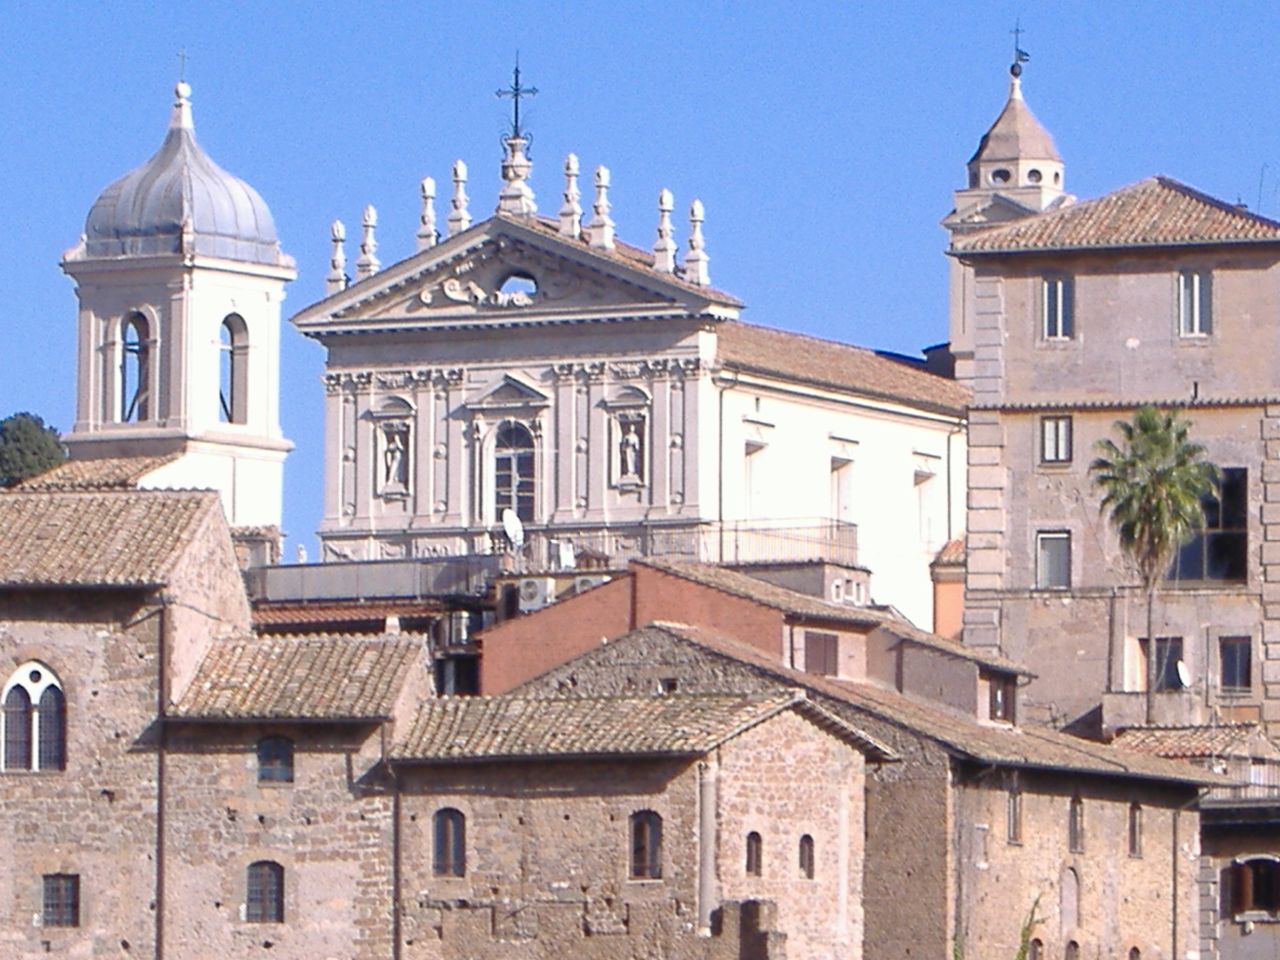 buildings with a bell tower towering above them